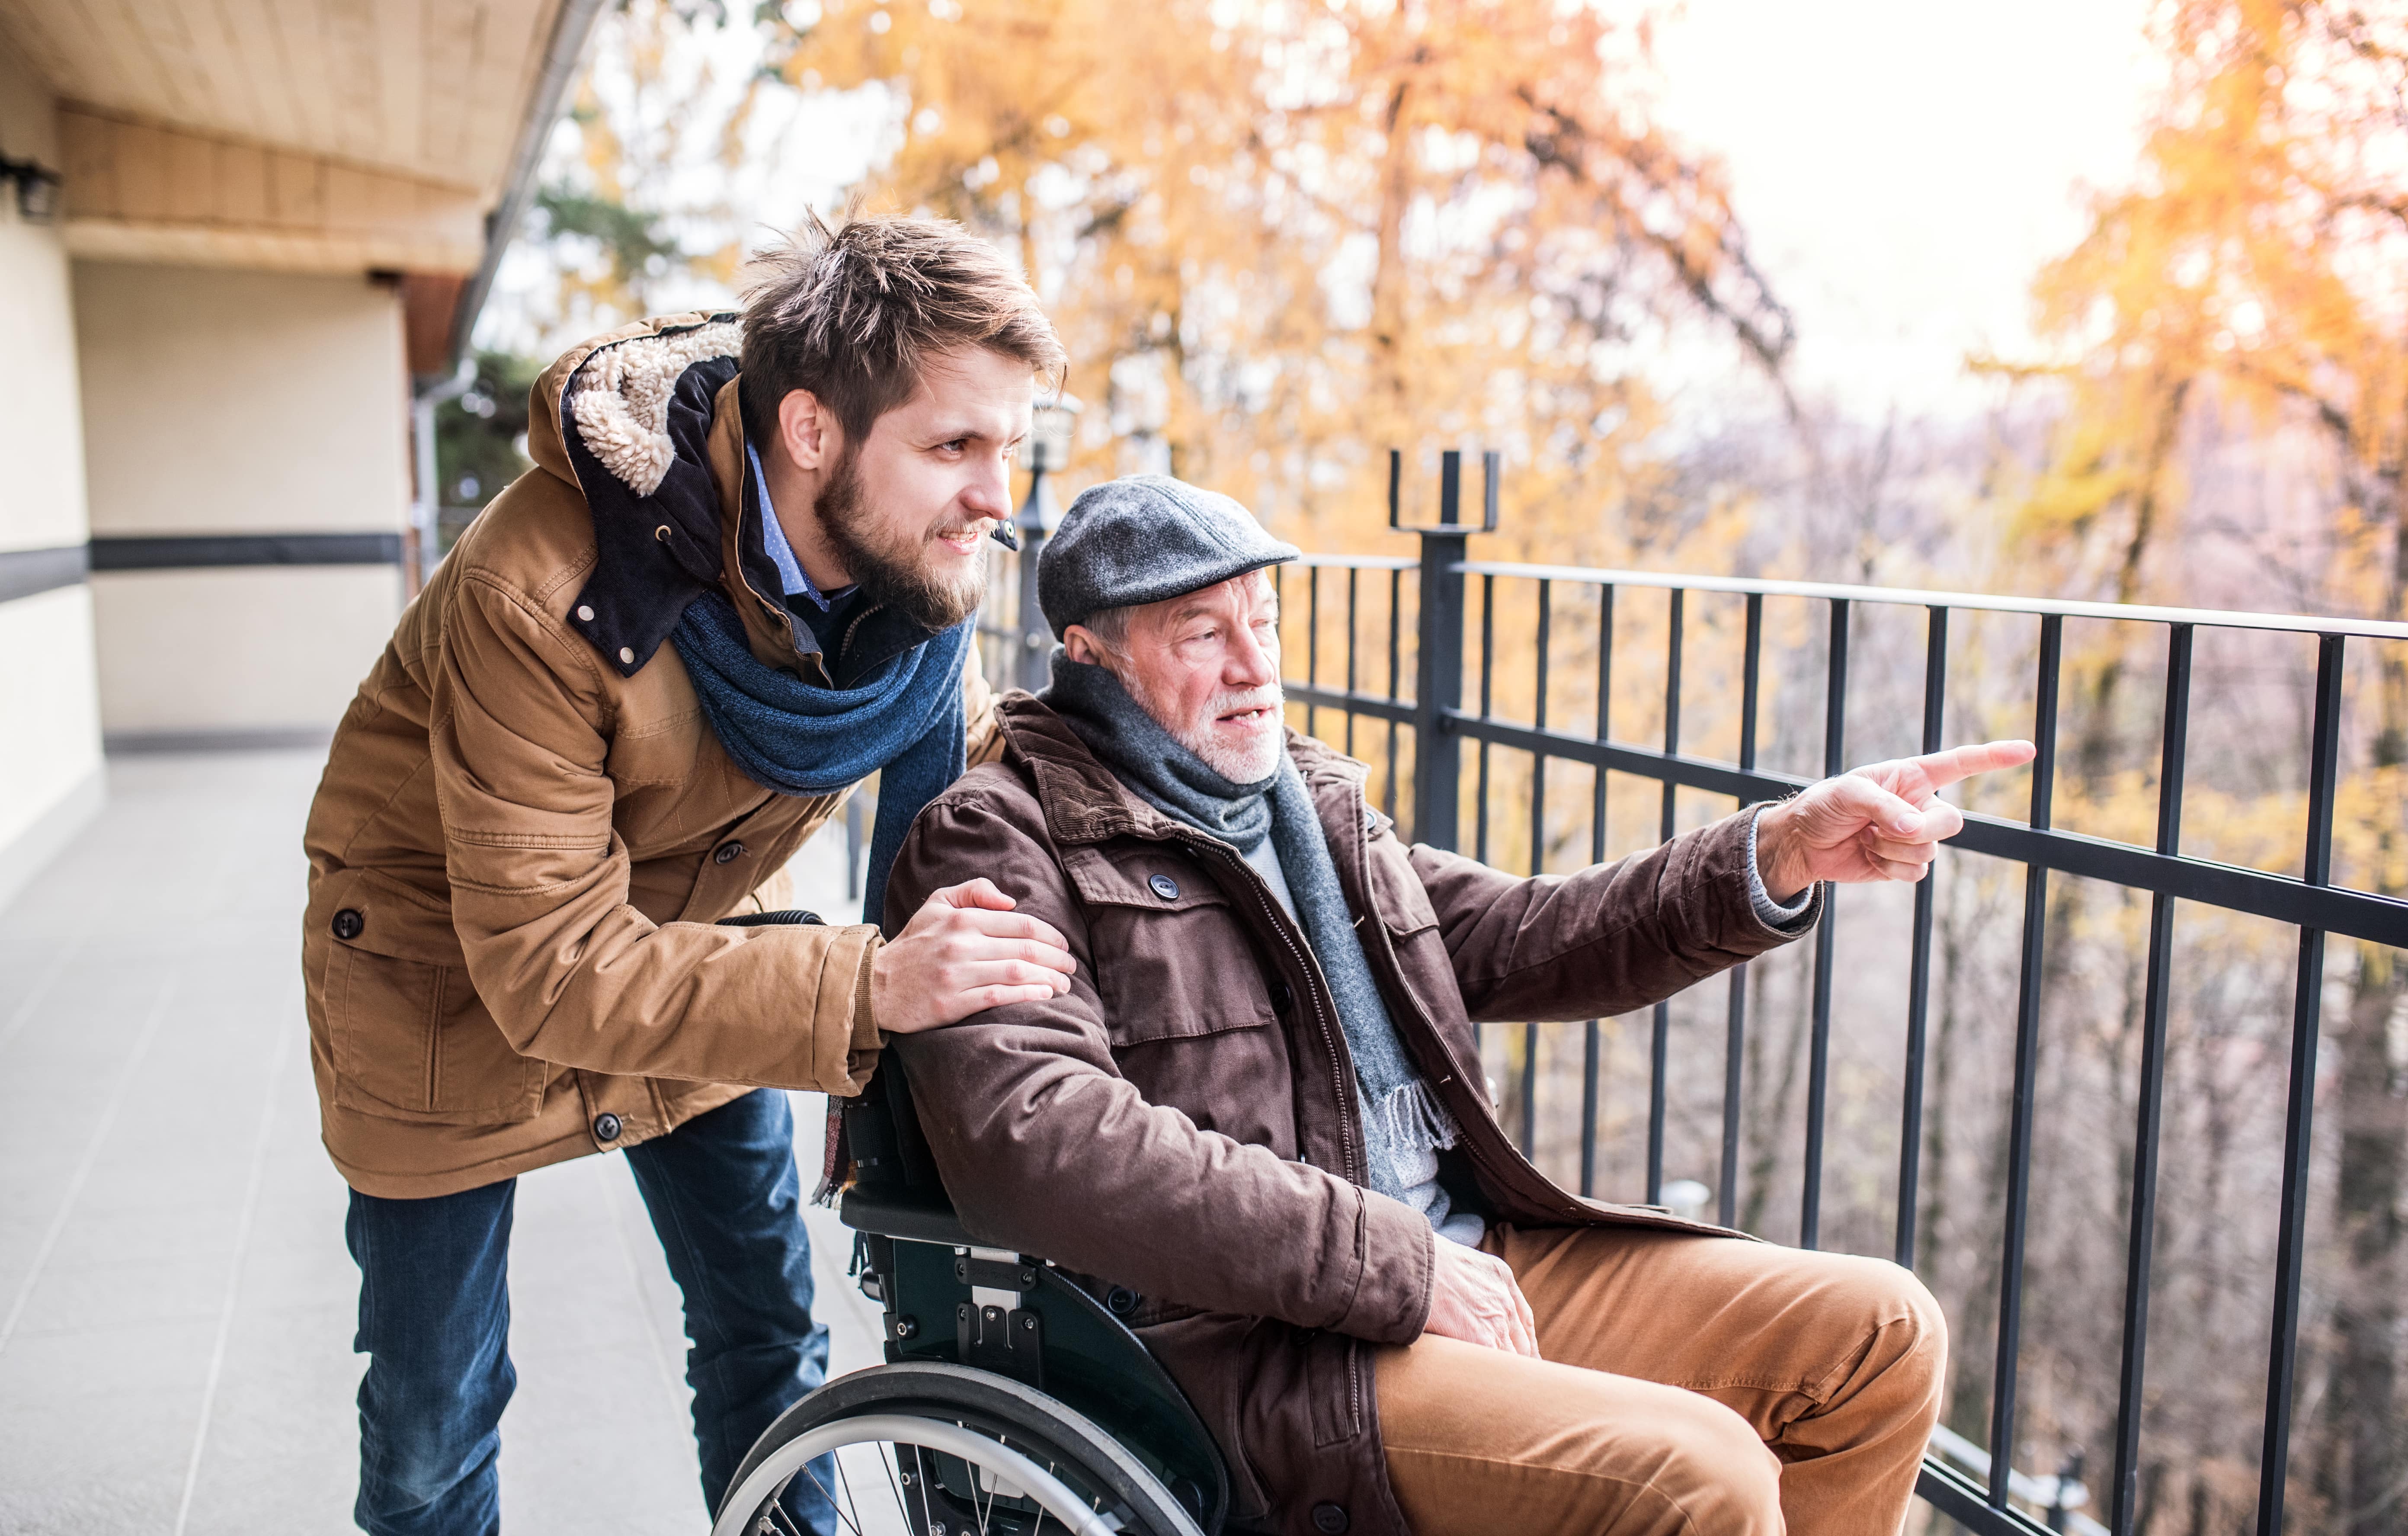 Young man leans close to older man in a wheelchair